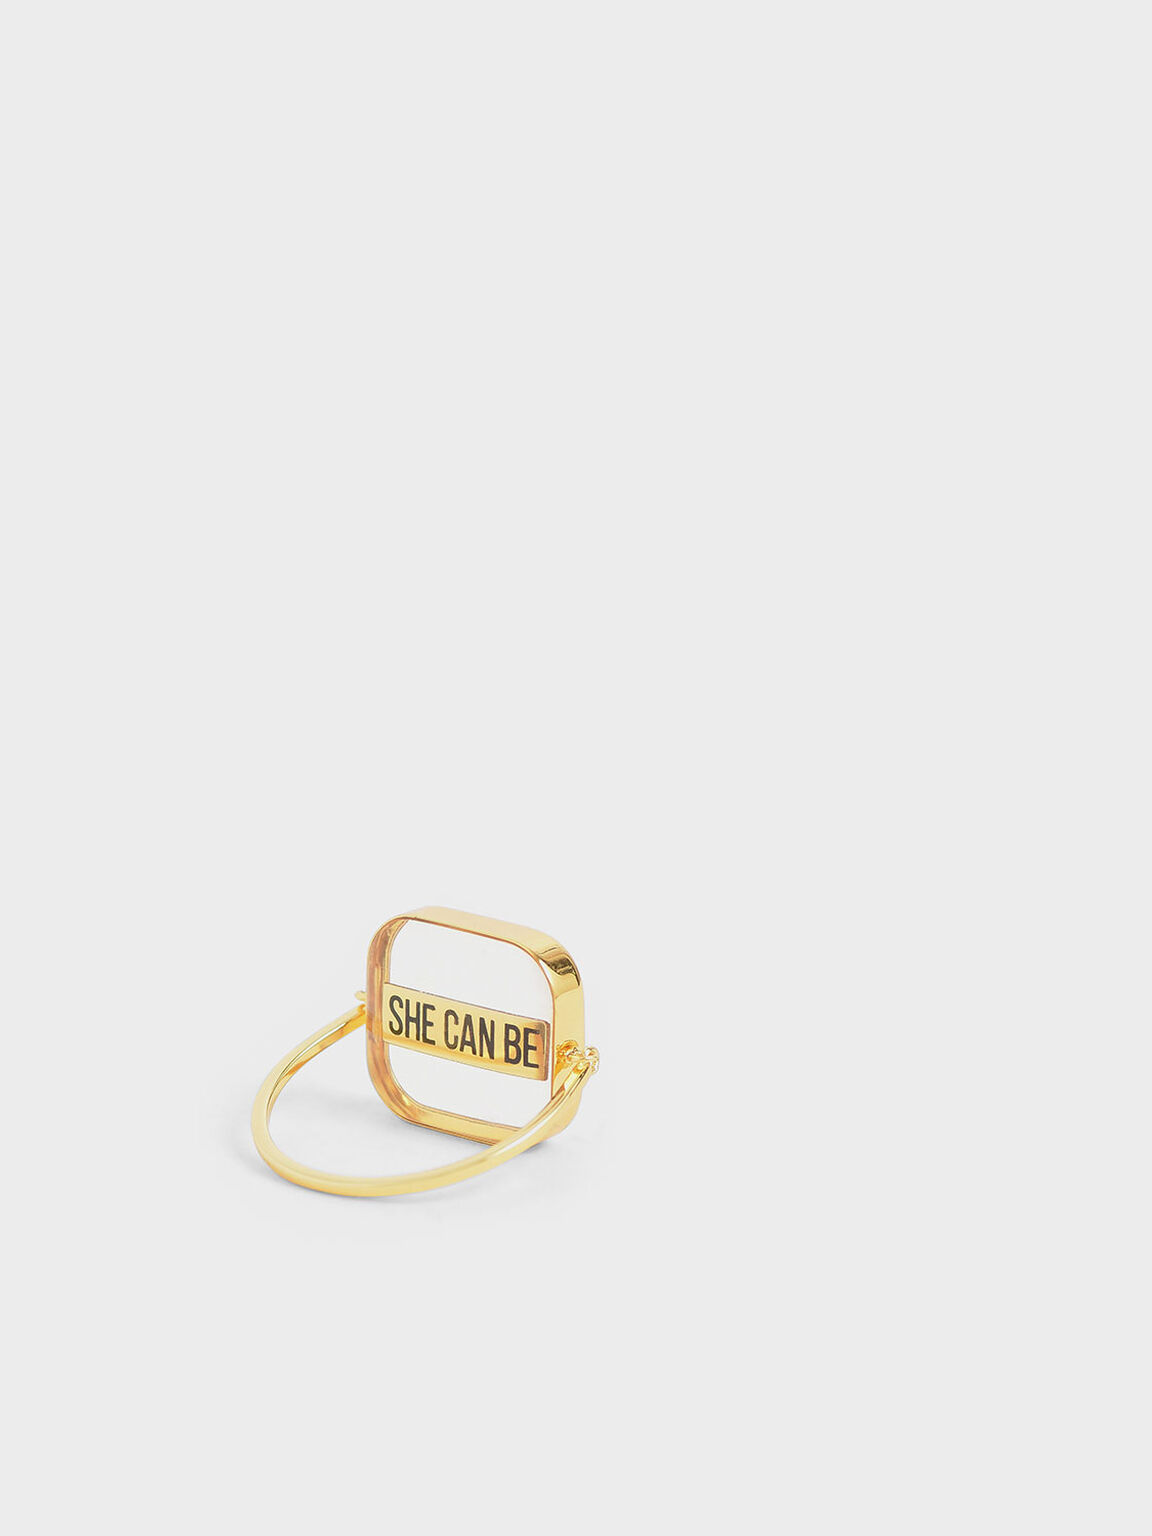 The Purpose Collection -  'She Can Be' Ring, Gold, hi-res